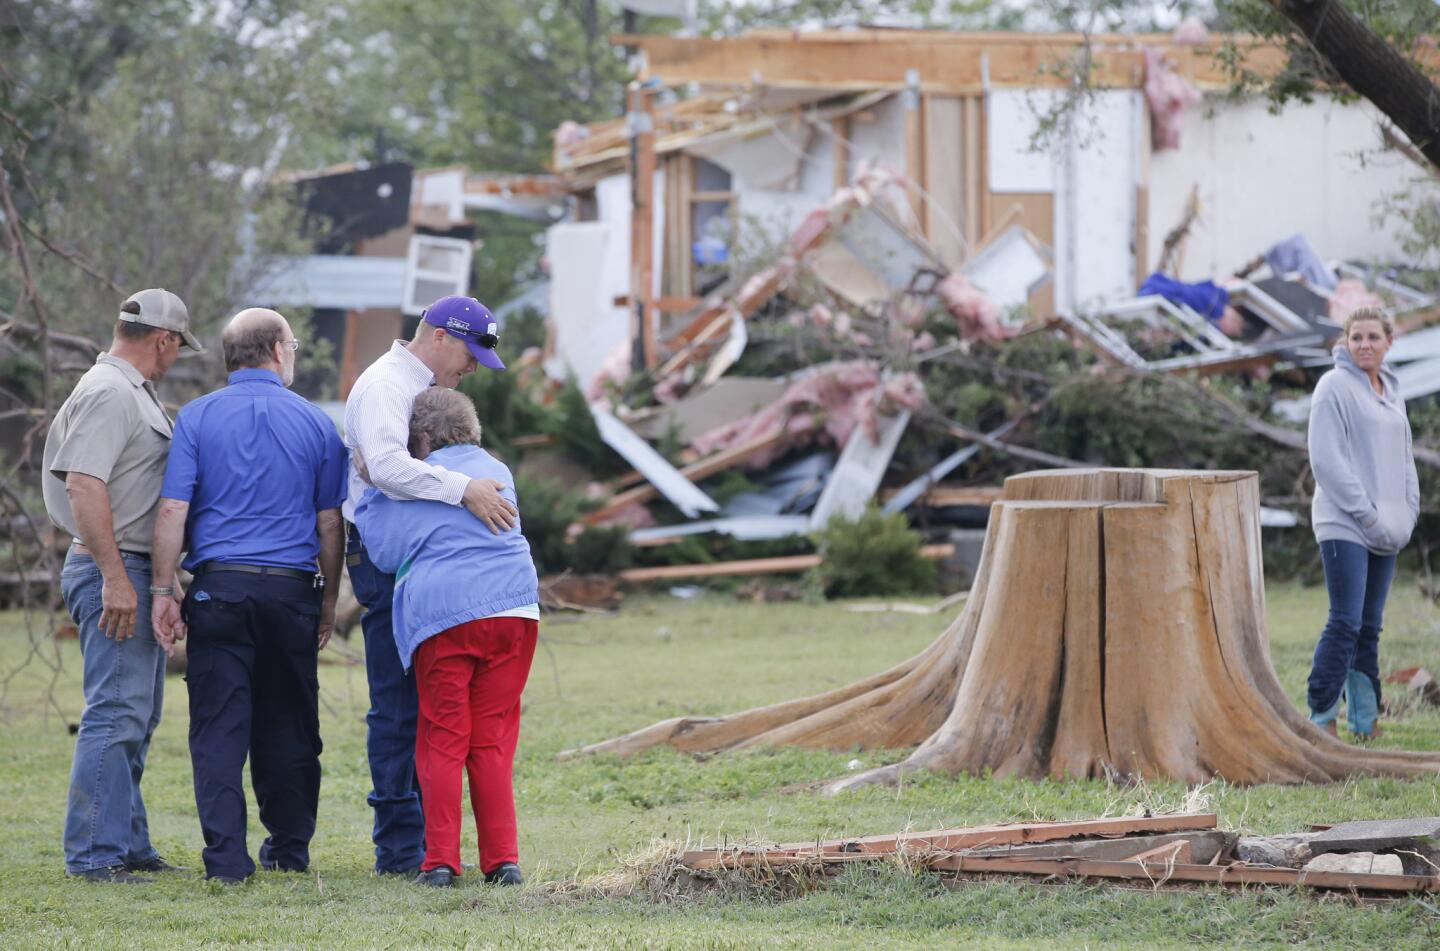 Charmaine Foraker is hugged by her son Harlan, as she and her other son Craig Foracker, second from left, arrive at the scene of the family farmstead near Bentley, Kan., that was destroyed by a tornado Wednesday, May 6, 2015.